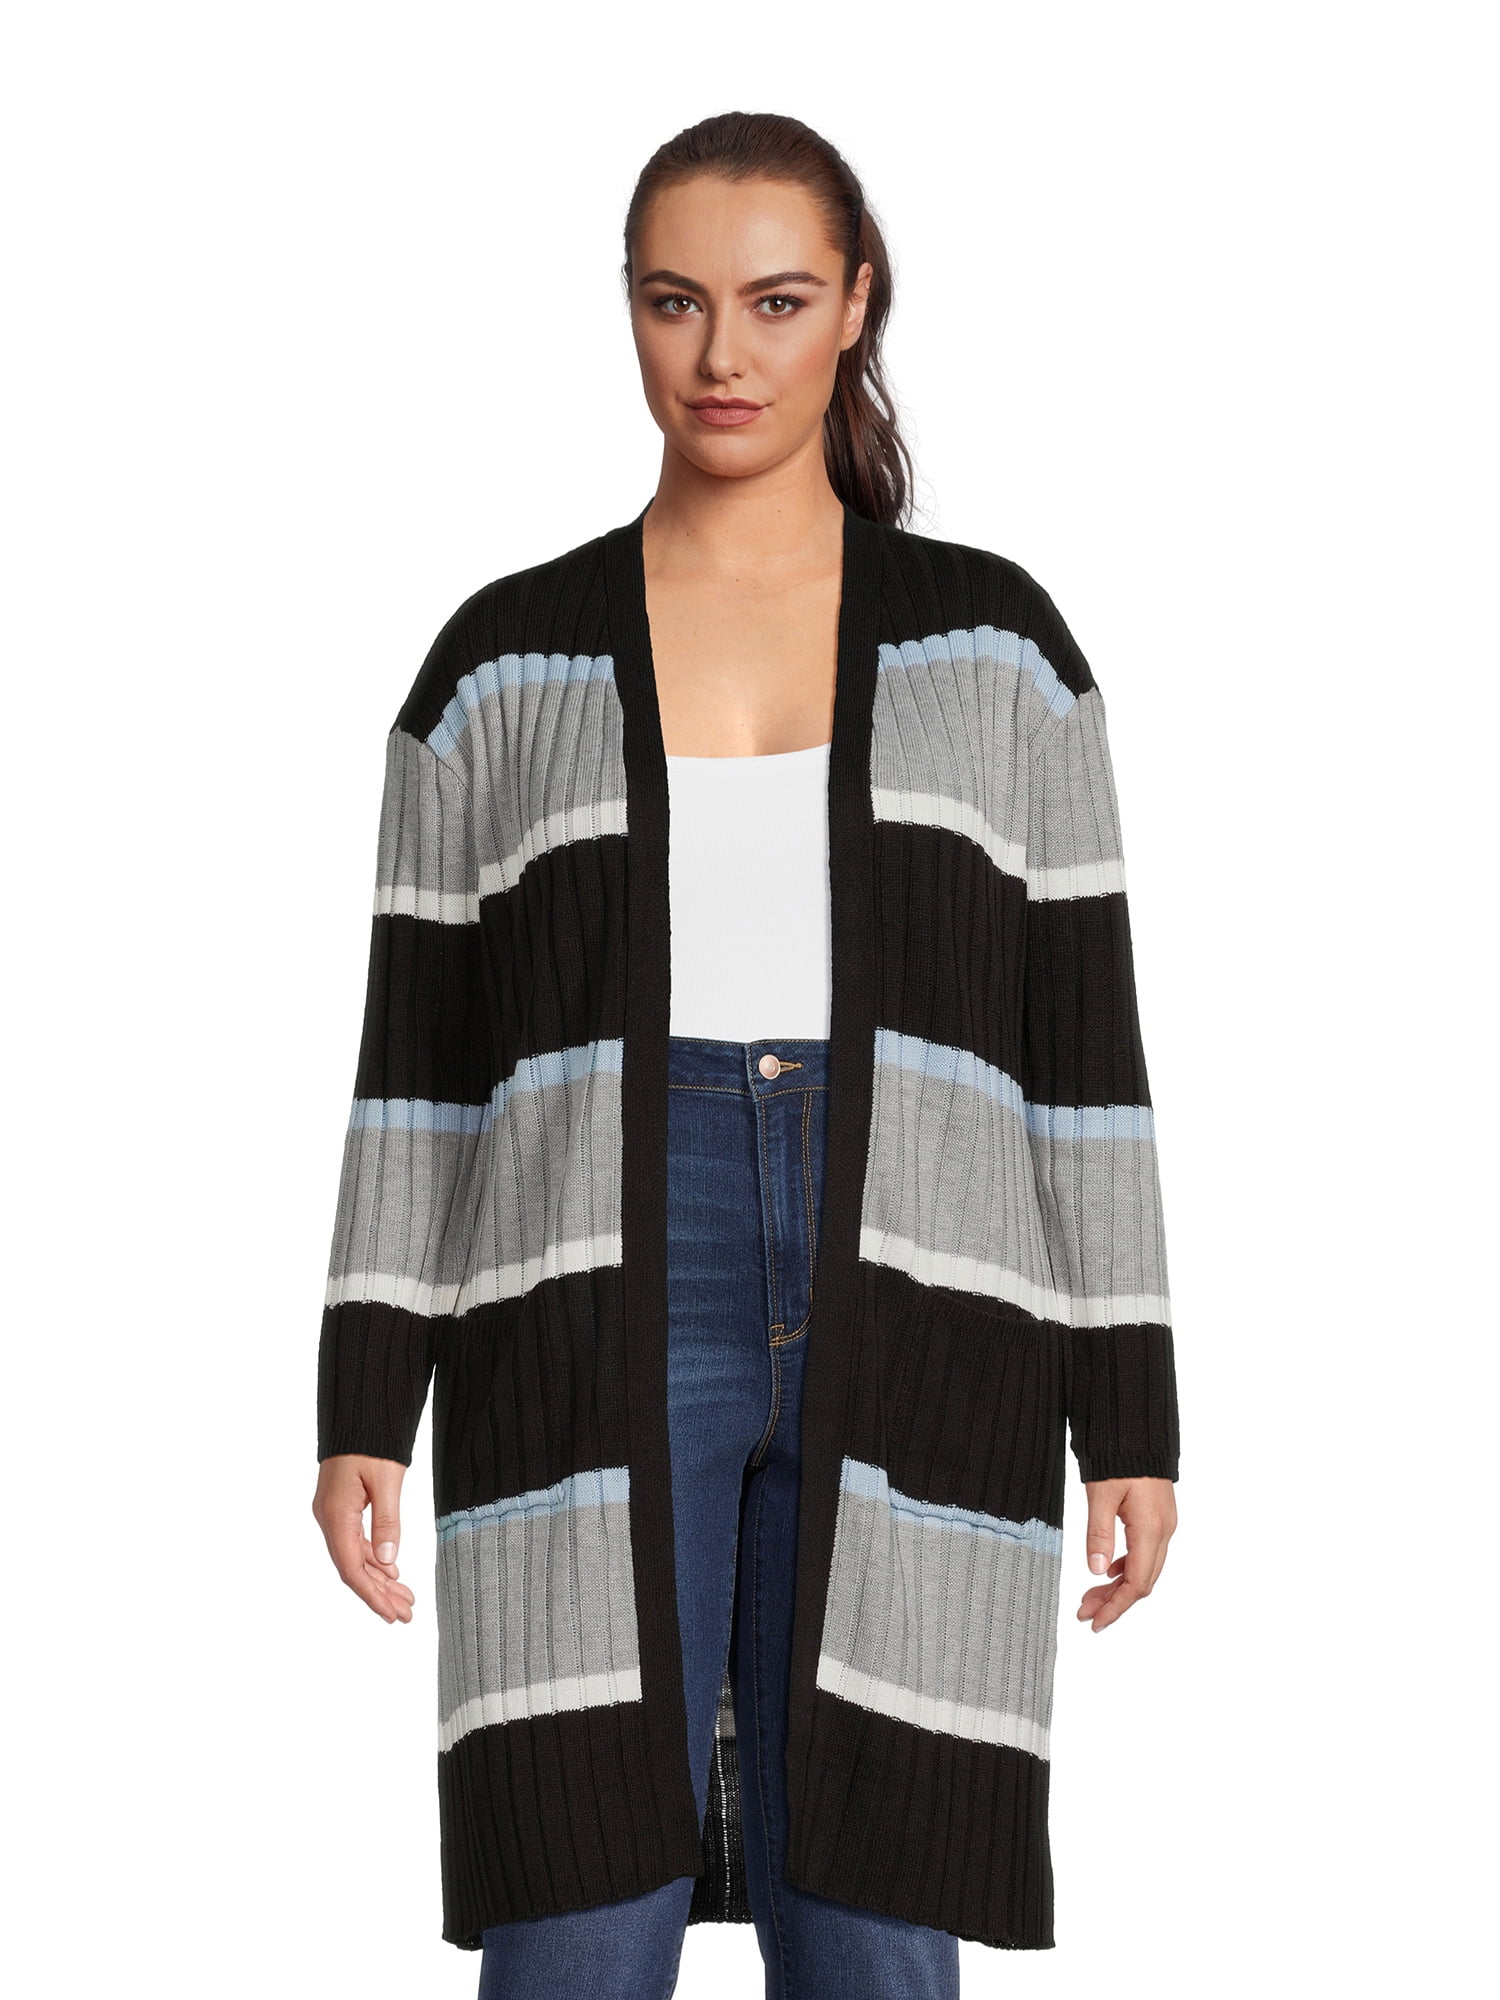 No Boundaries Juniors Plus Size Cardigan Sweater with Lace-Up Back ...